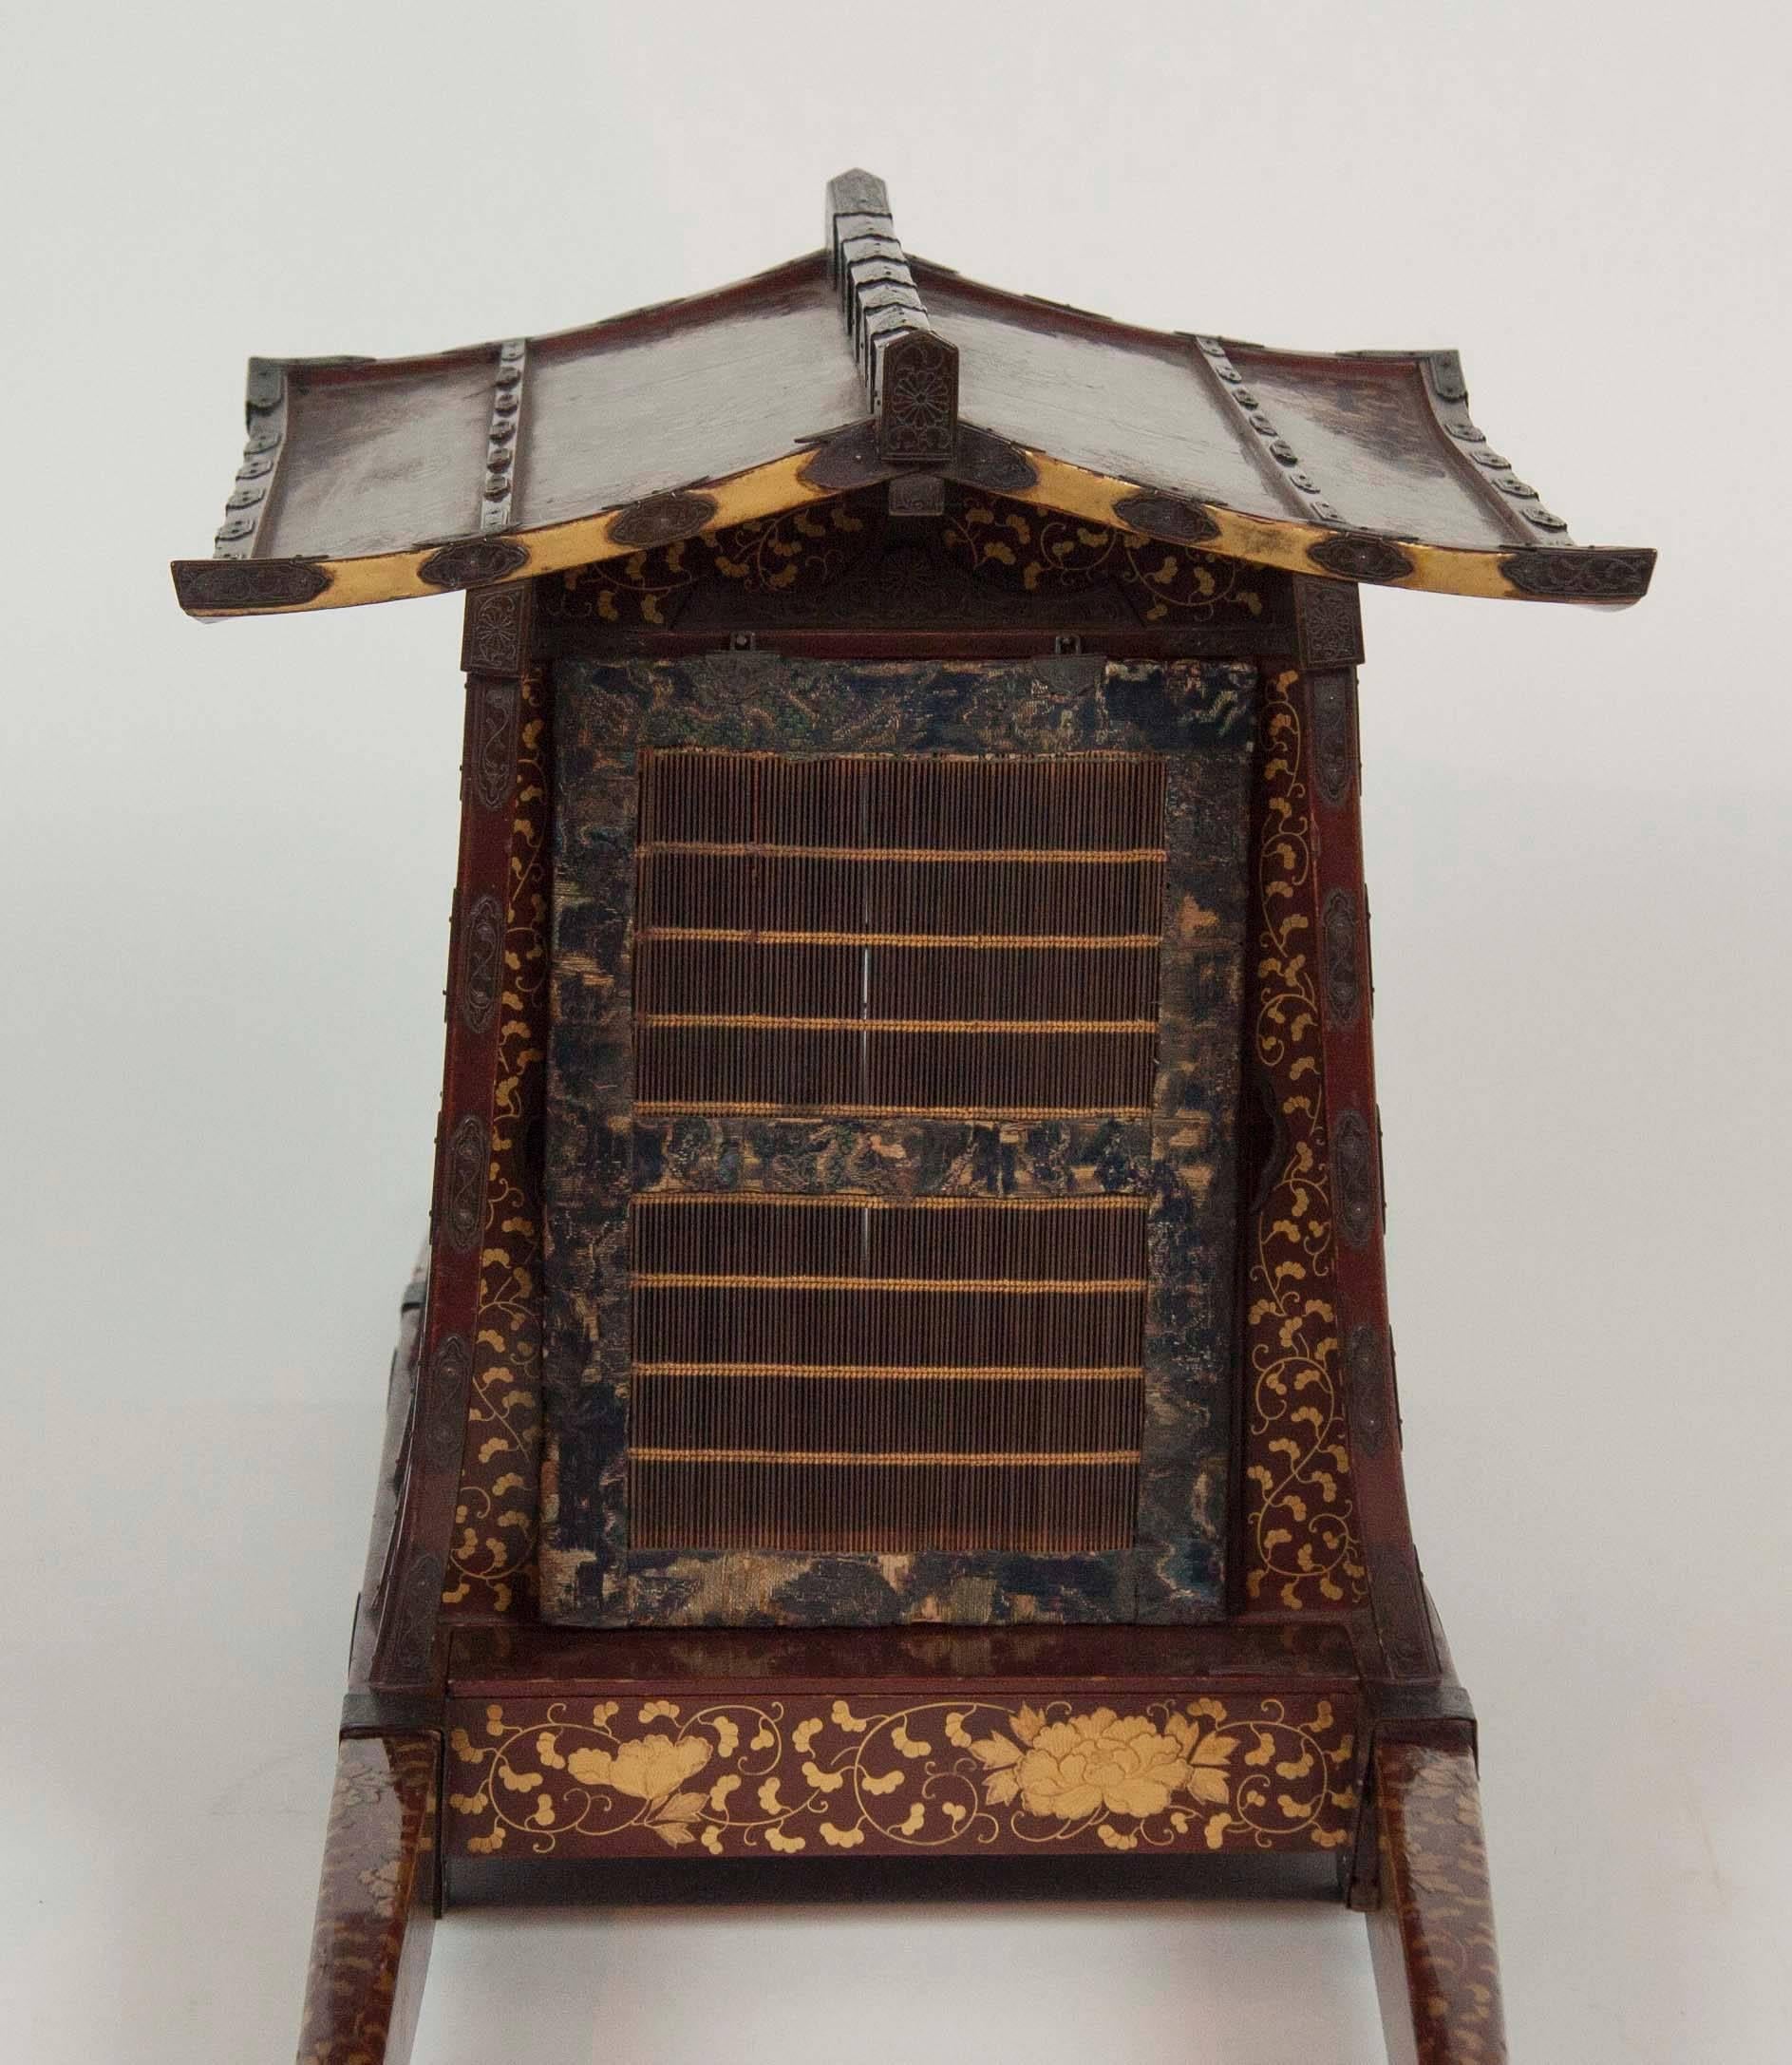 Japanese Edo-Meiji Period Lacquered Palanquin For Sale 2